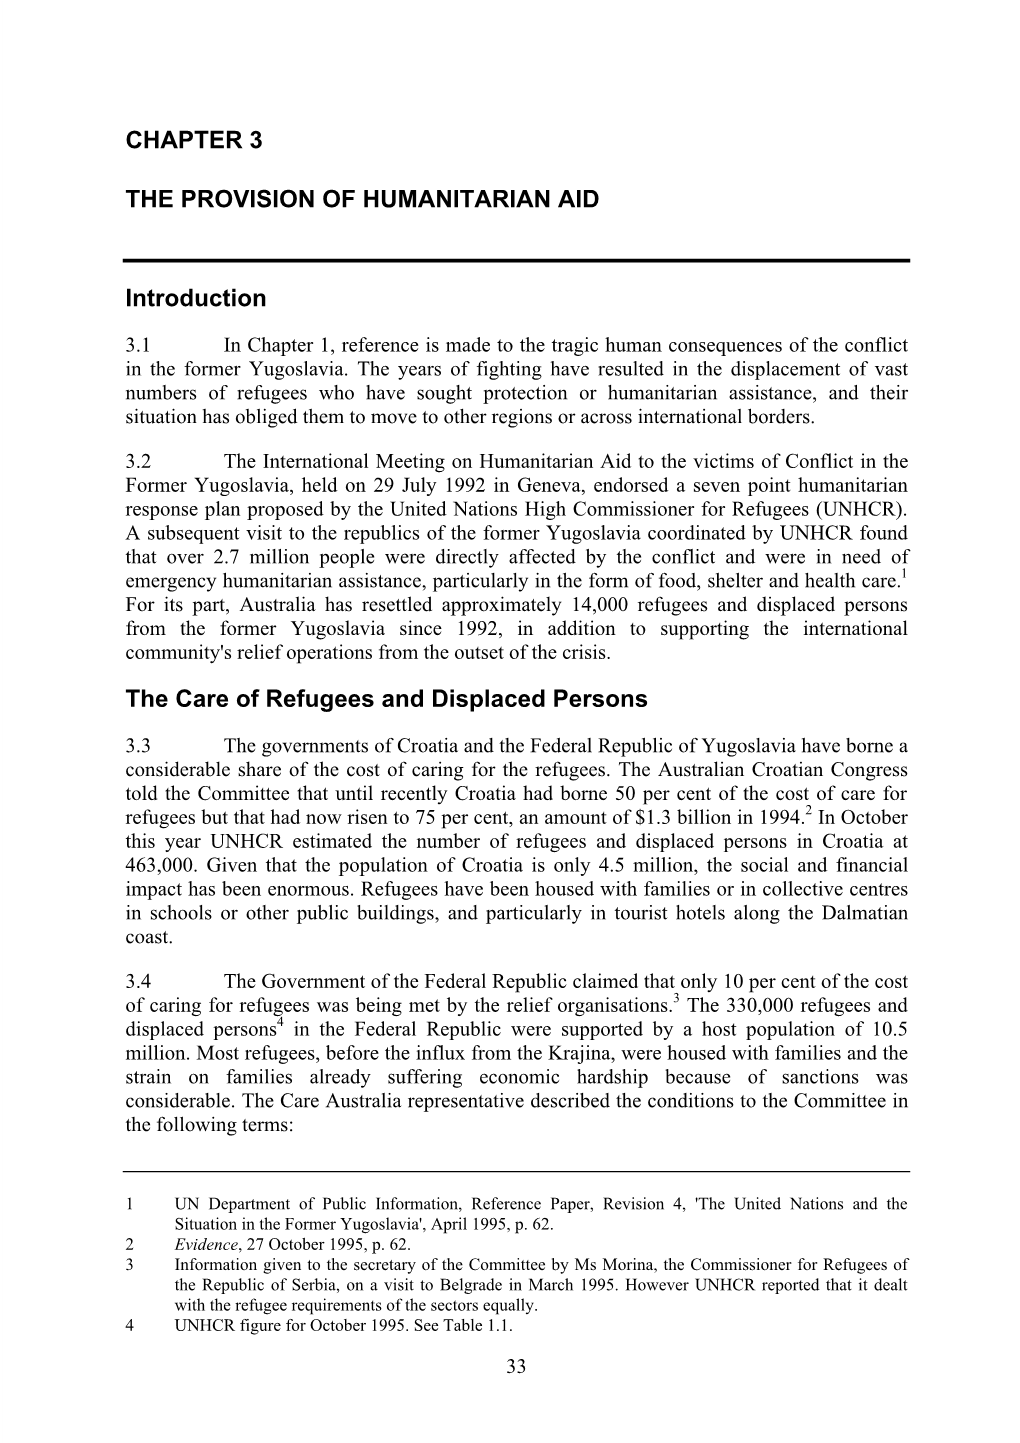 Chapter 3: the Provision of Humanitarian